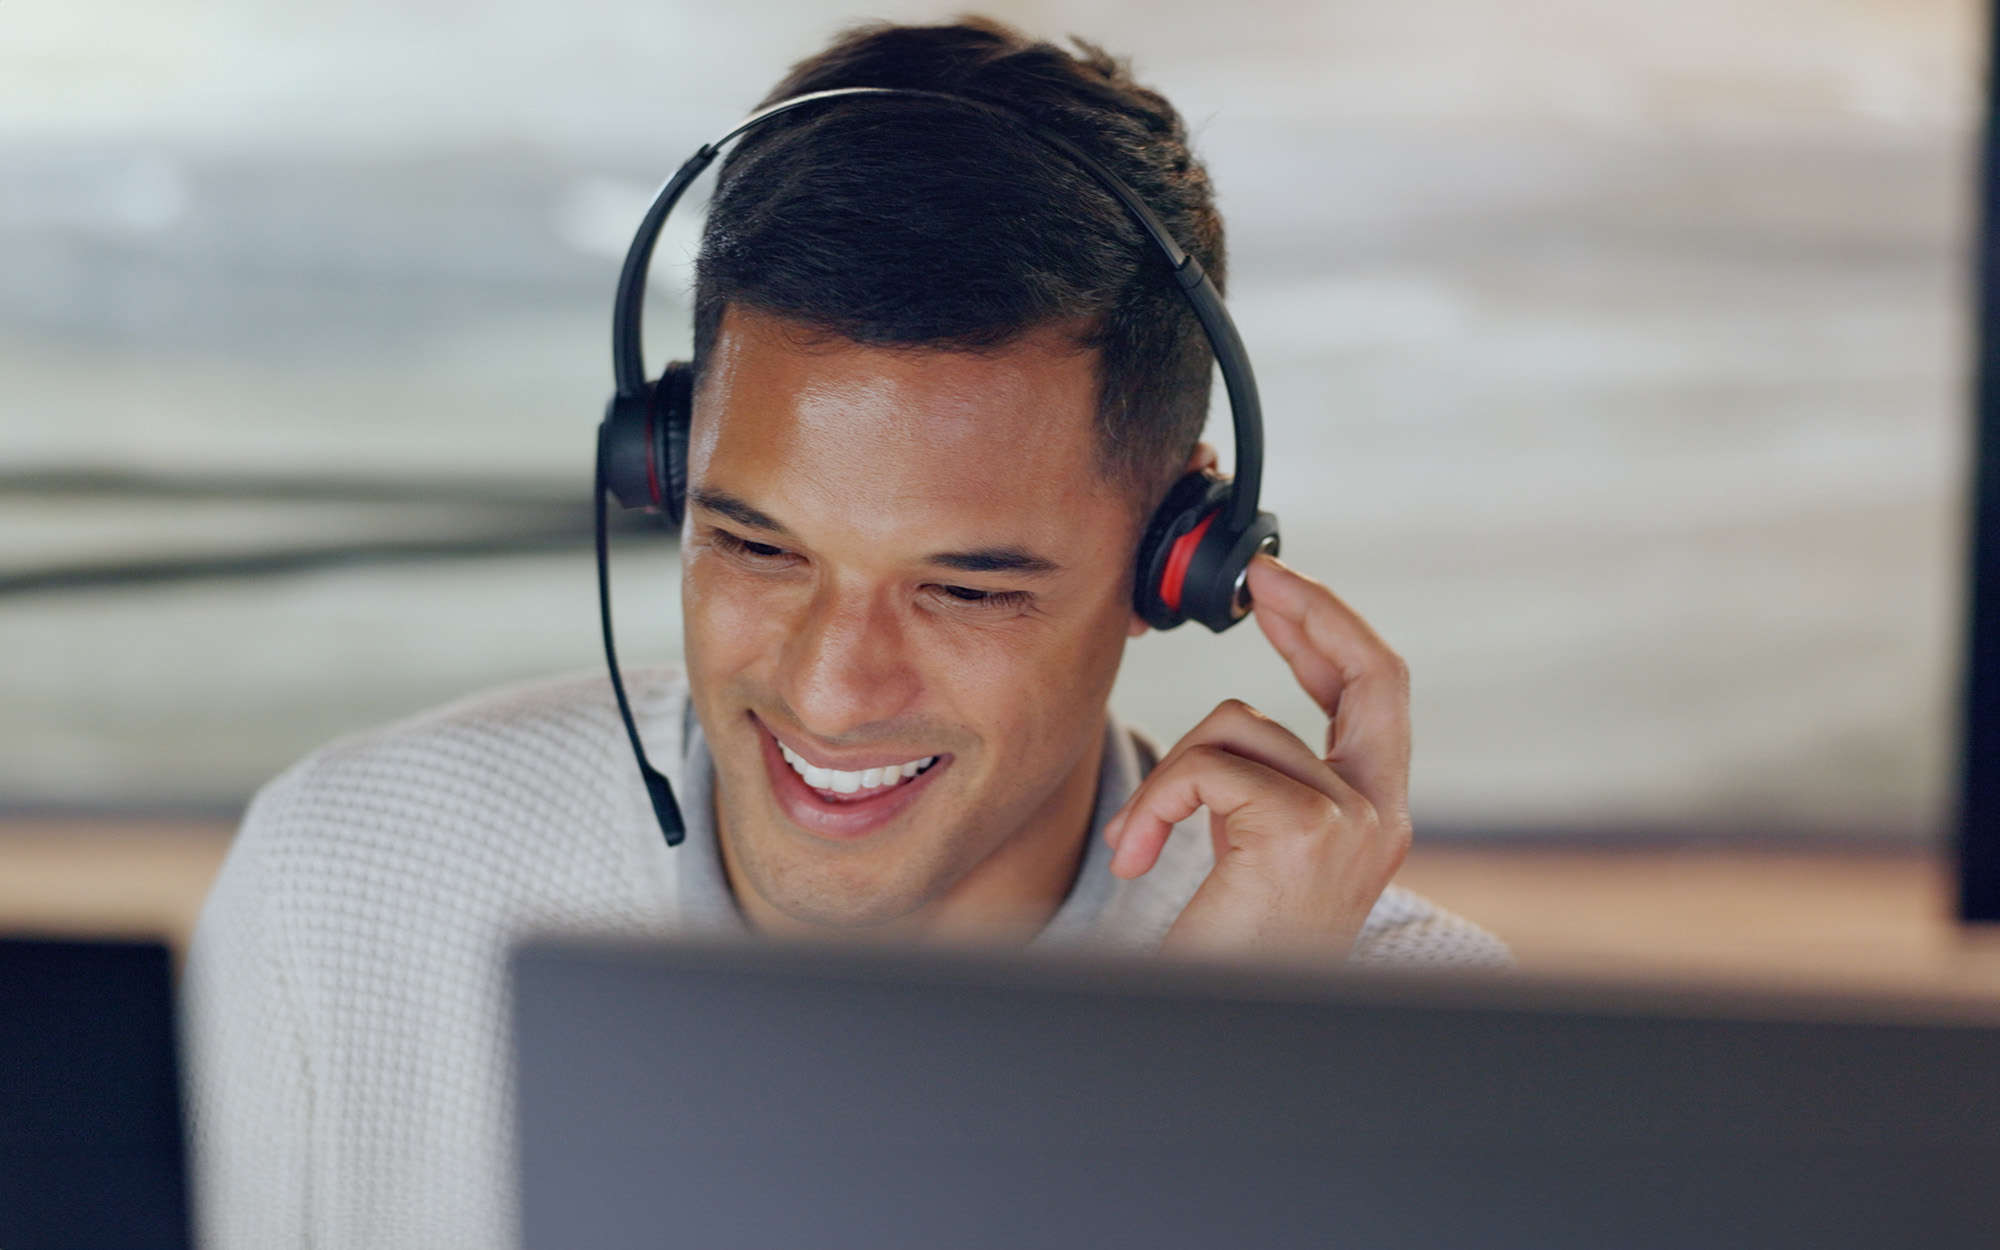 Front view of man smiling and talking on headset